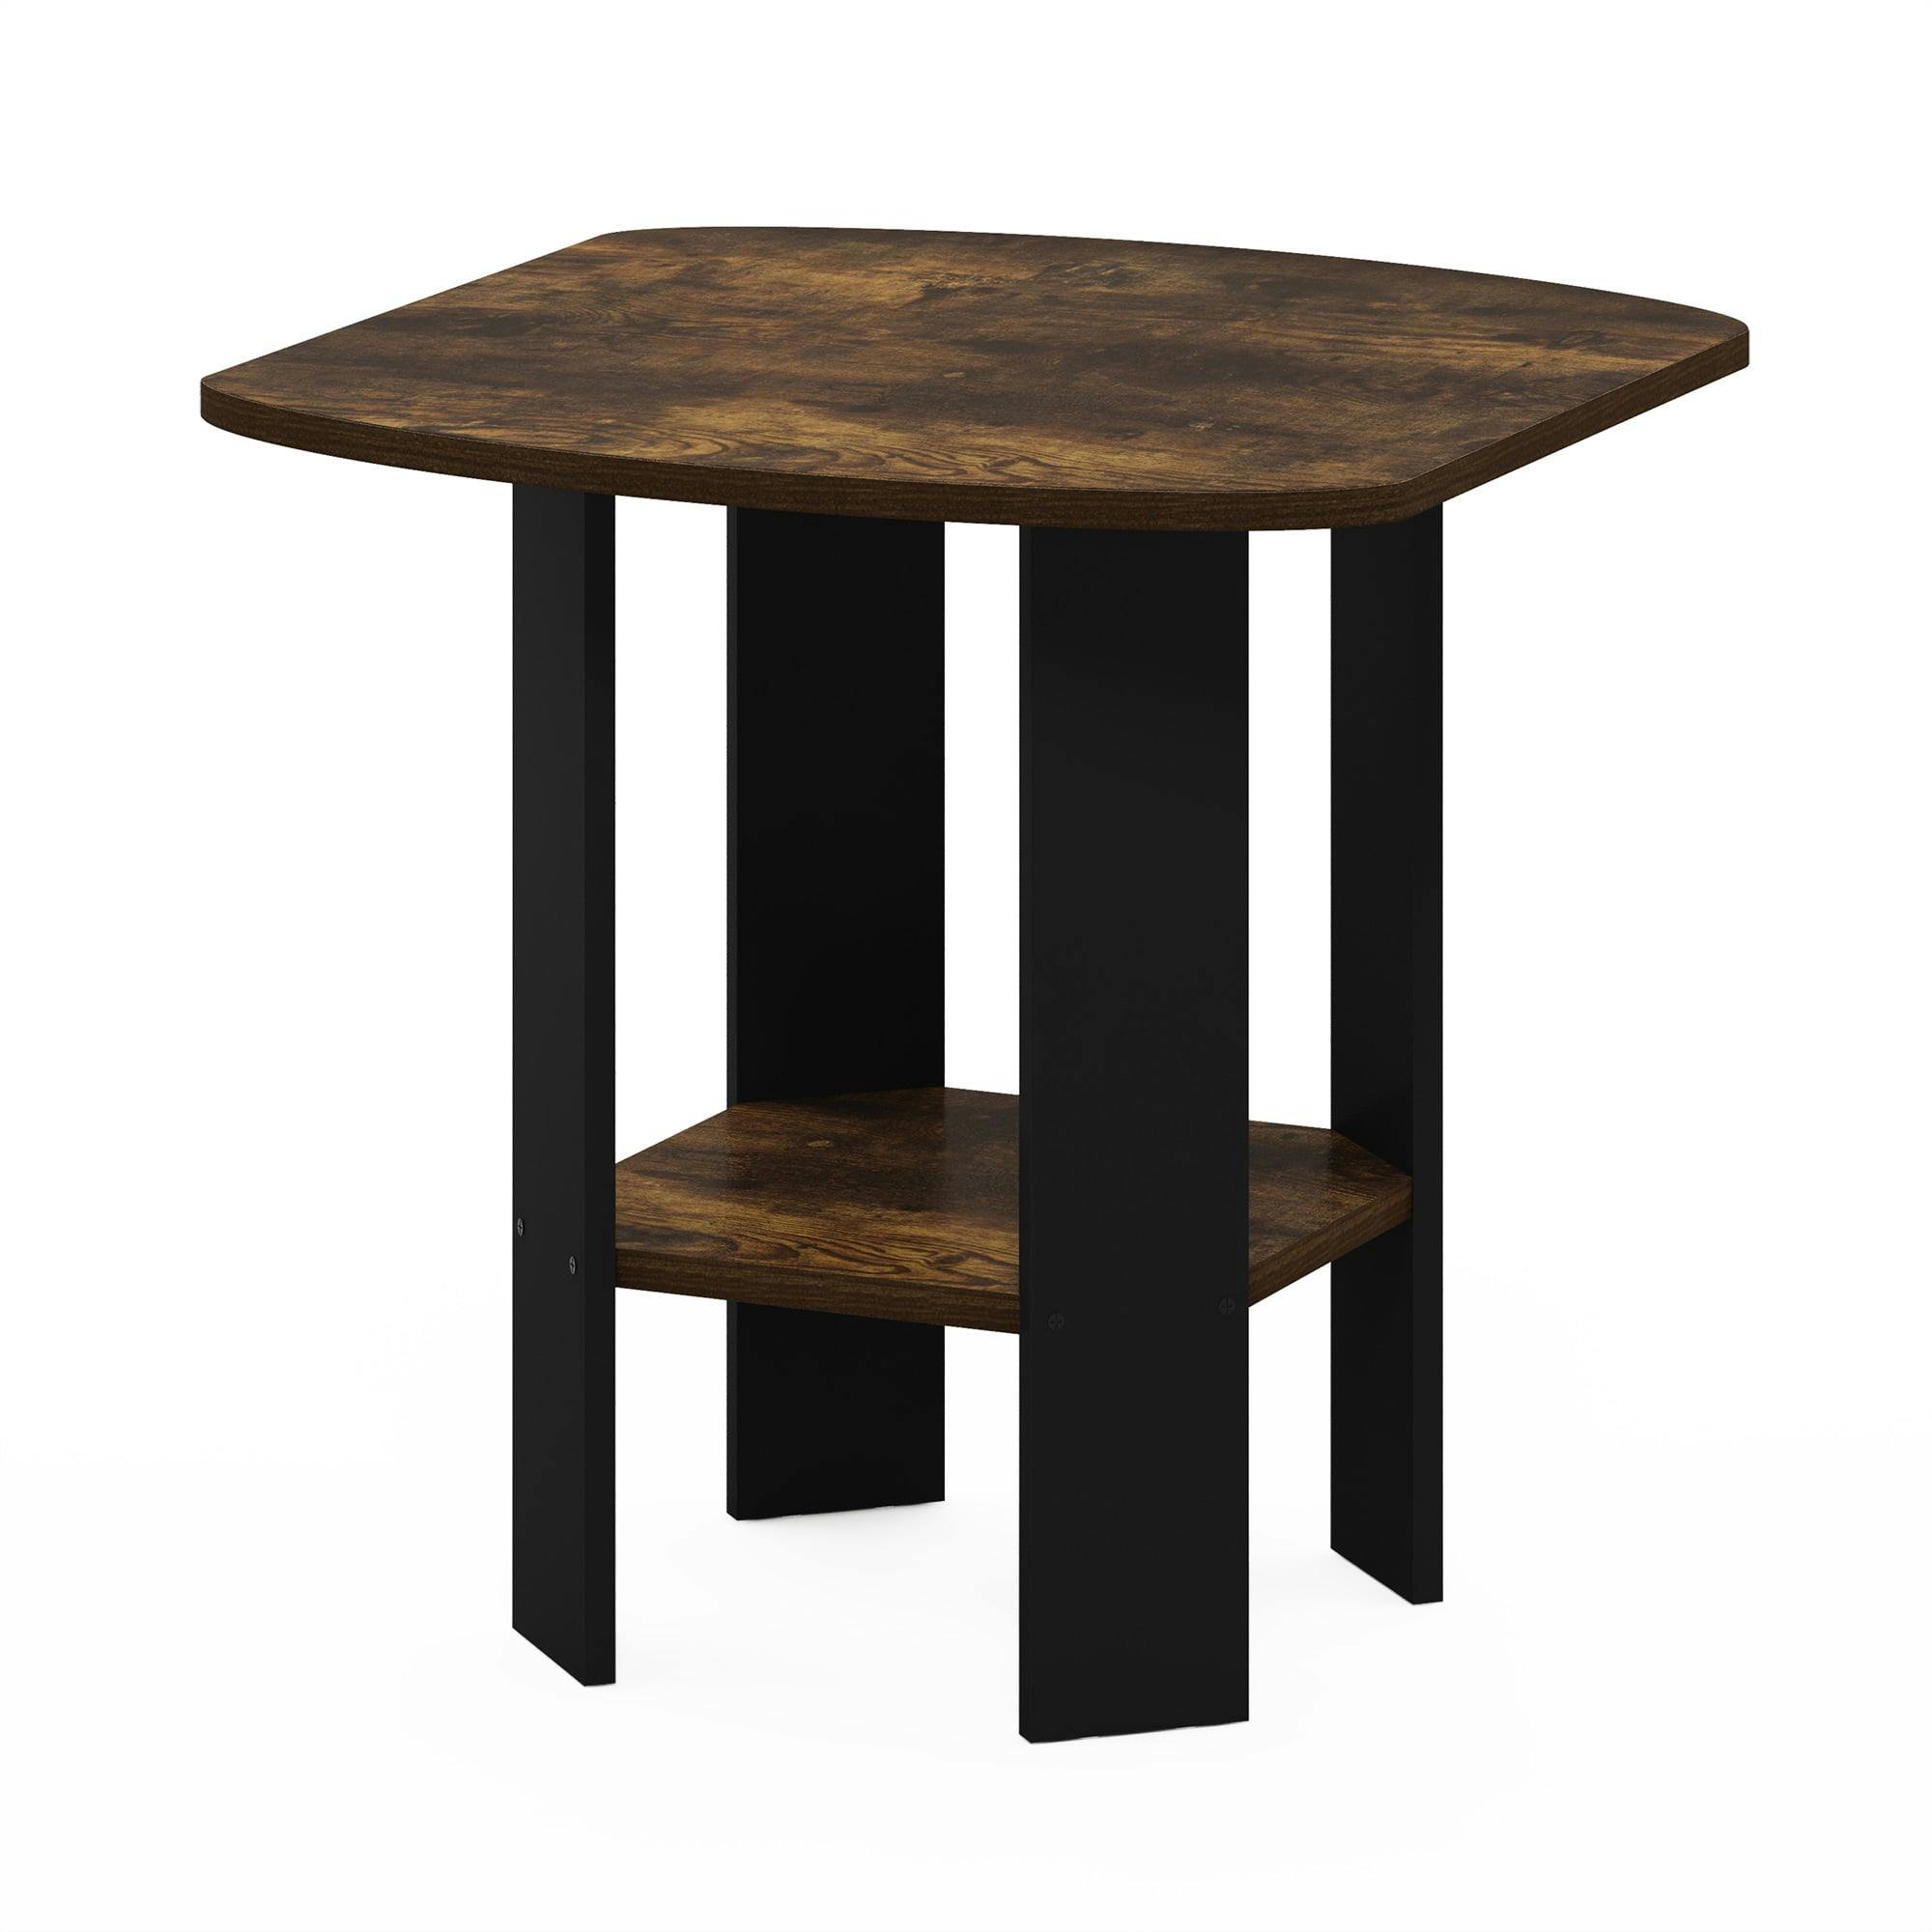 Amber Pine & Black Compact Rustic End Table with Storage